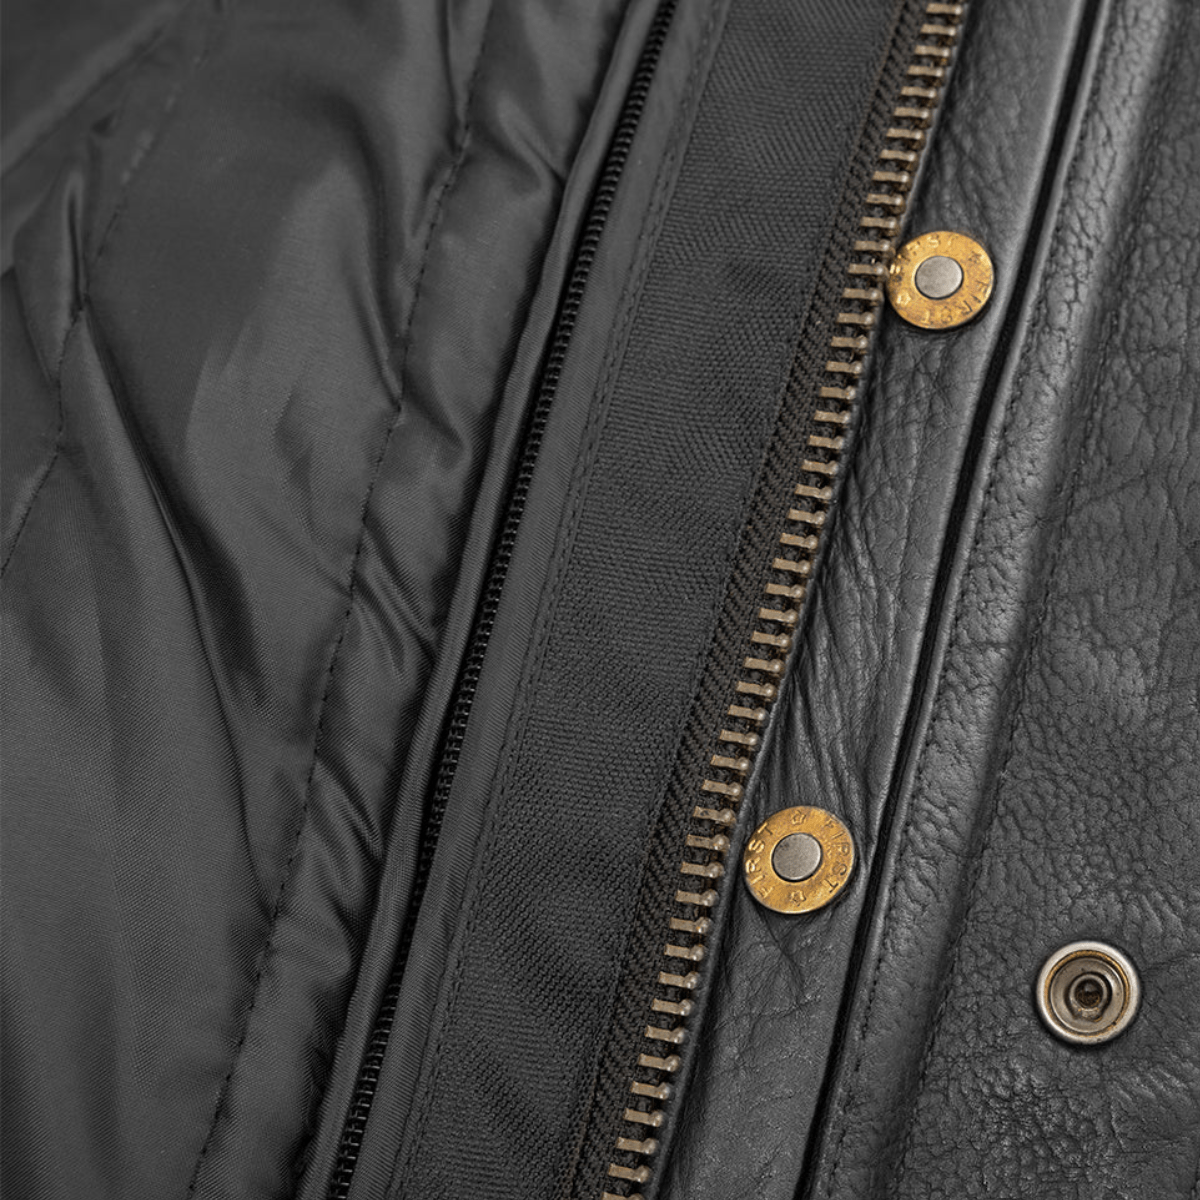 A close up of a high-quality leather zipper on the First Manufacturing Raider Leather Jacket.